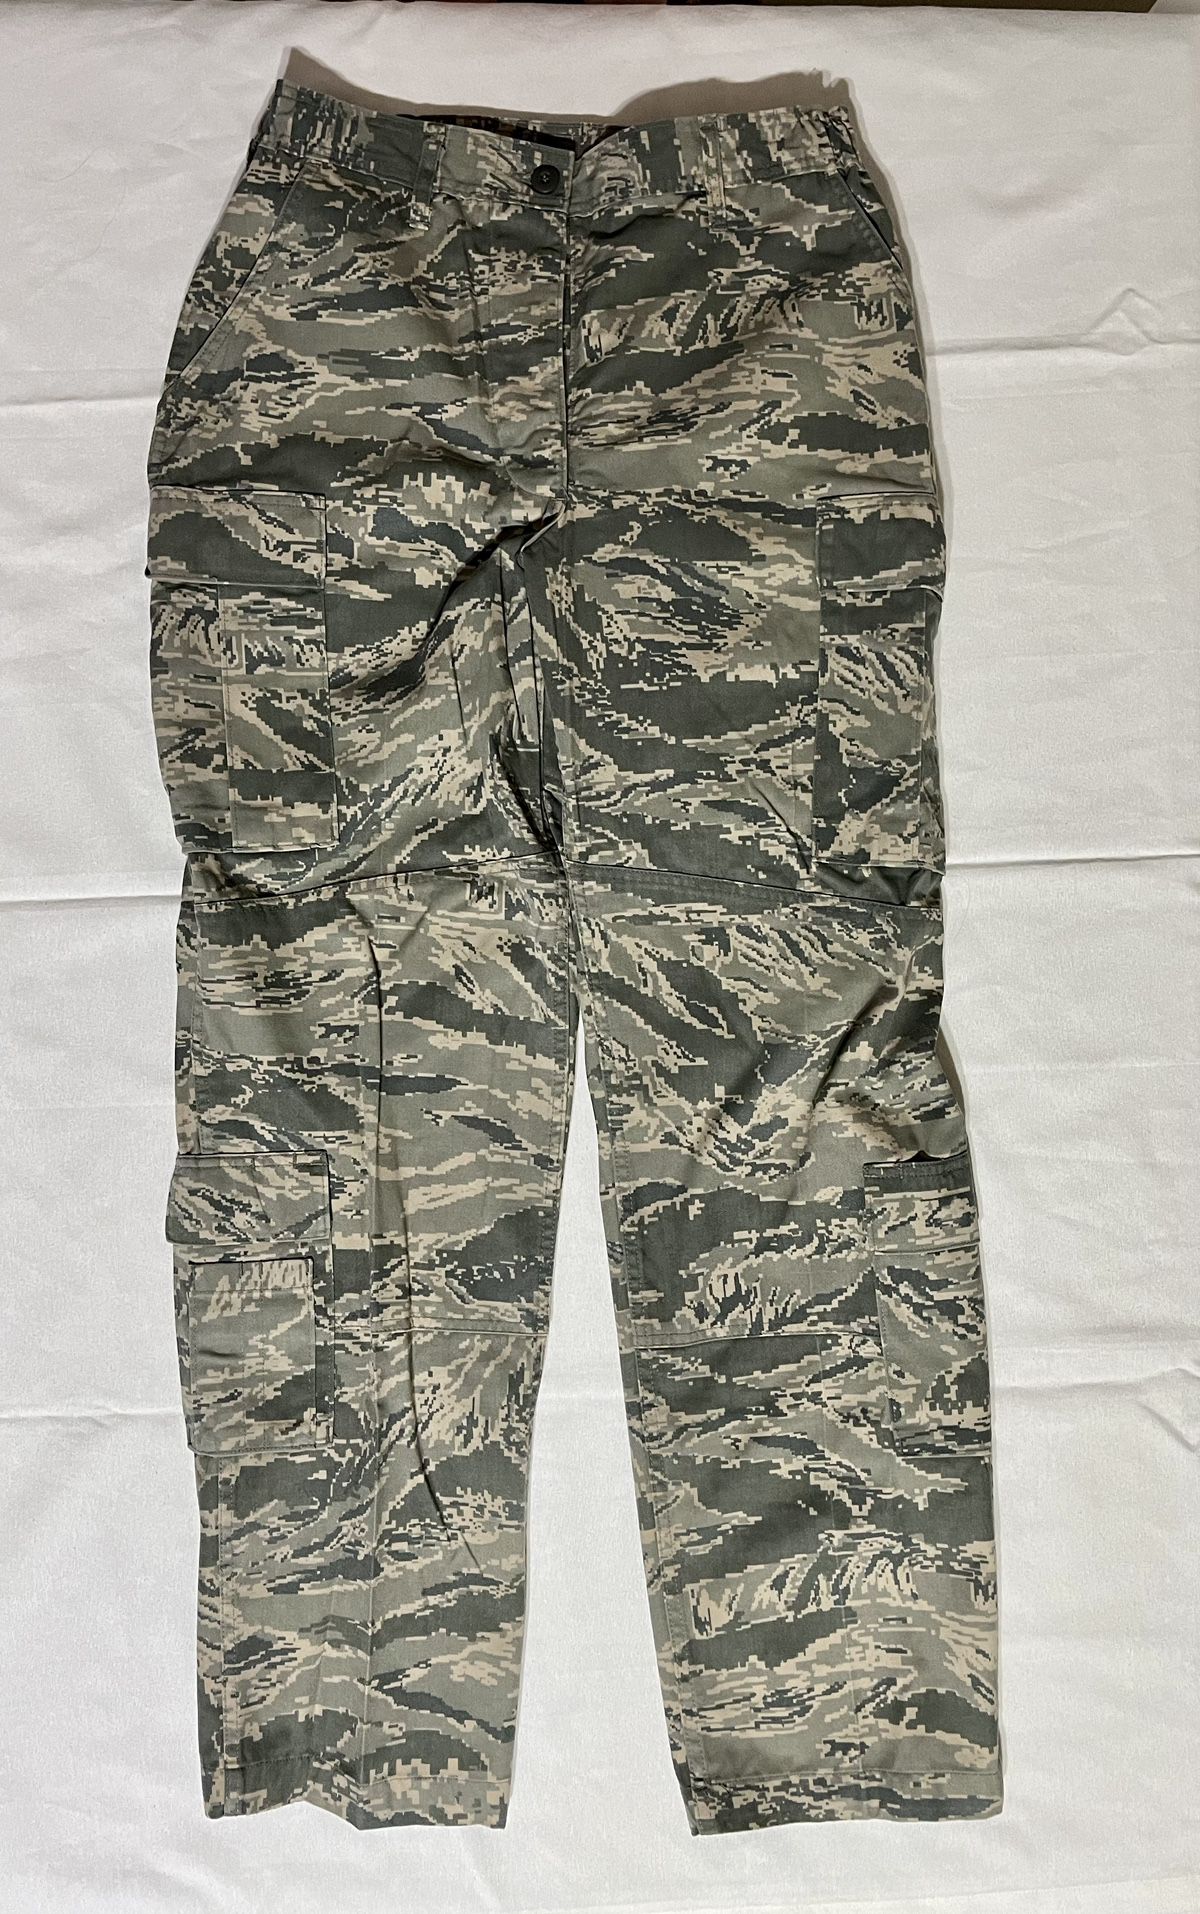 Air Force Military Camo Camouflage Pants Trouser button Fly Nylon Size 31 x 33